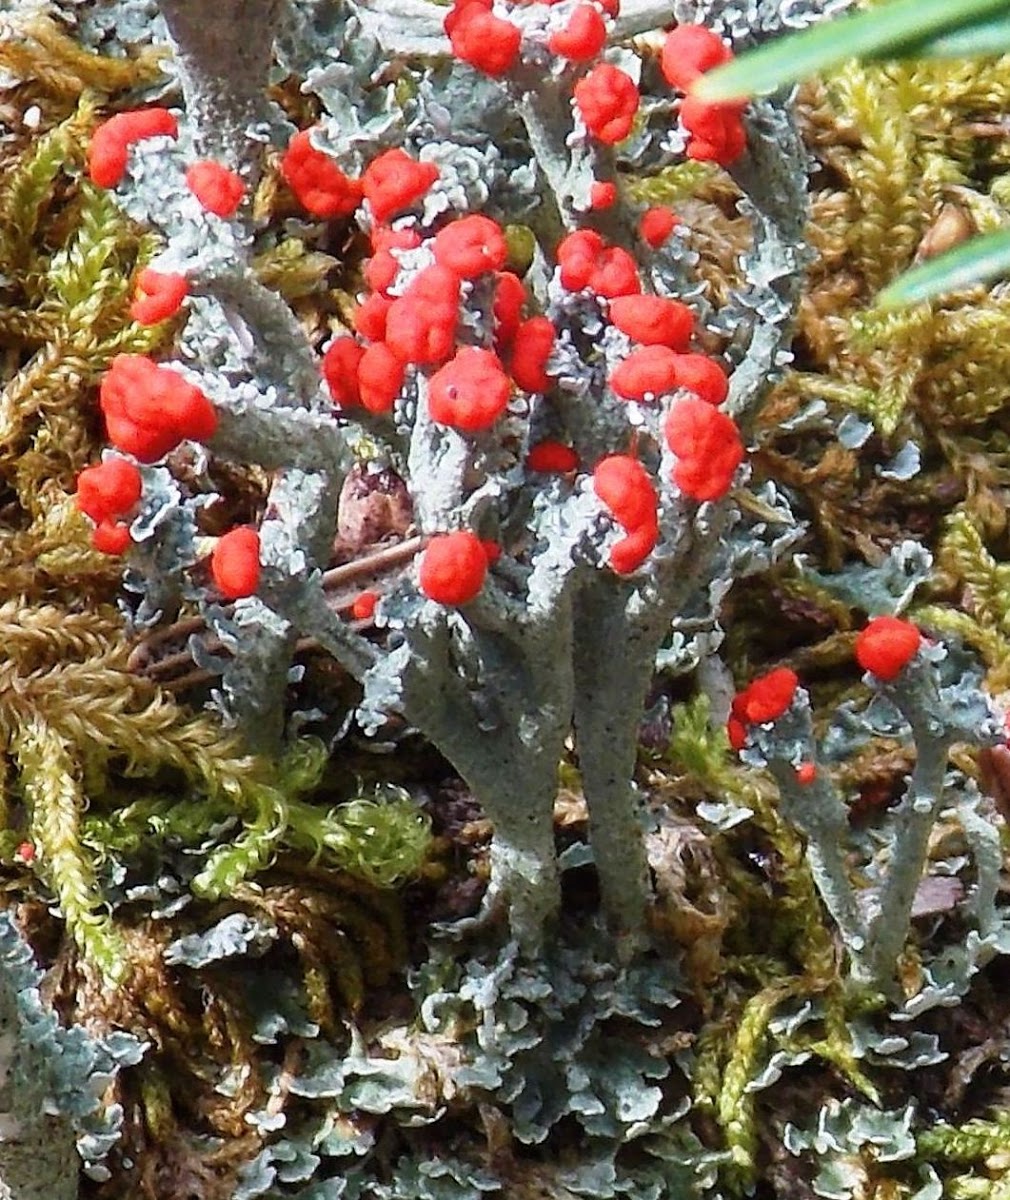 red-capped British soldiers lichens